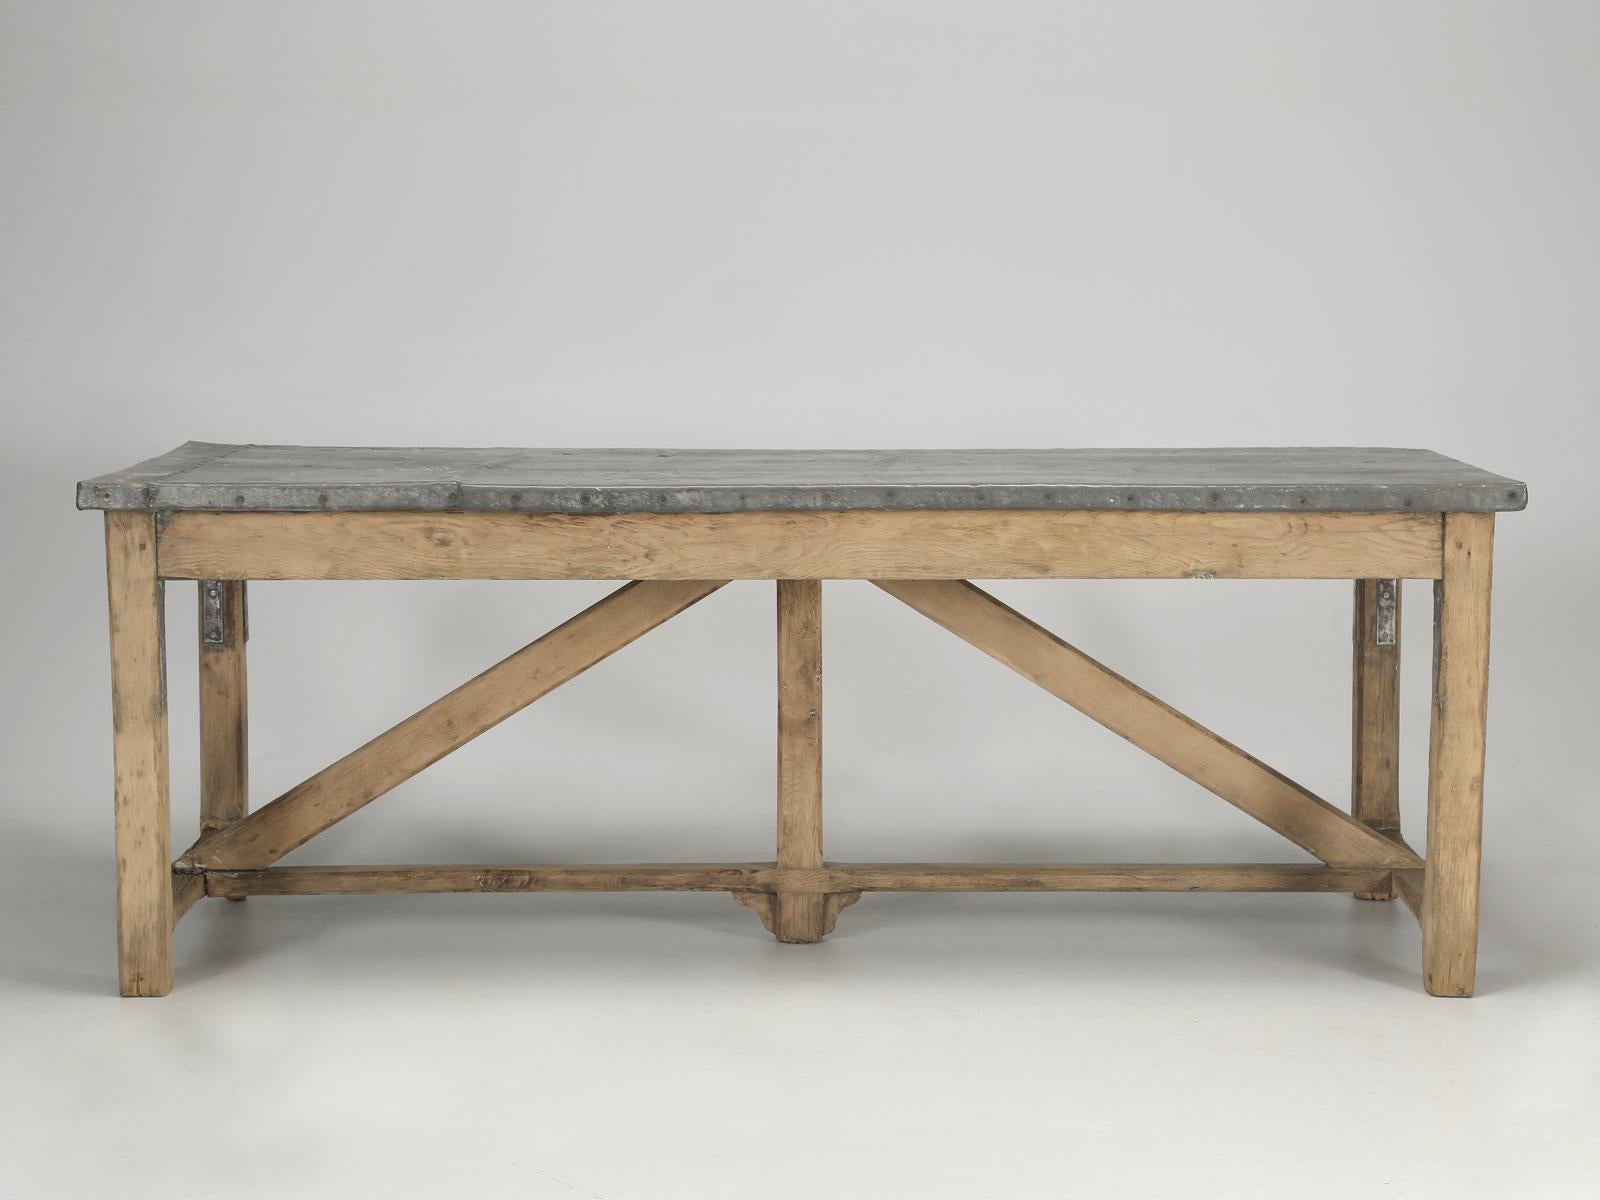 Antique Country French Industrial style table that probably was used outdoors for an extended period of its life. Our work table was discovered in the Toulouse area of France and was sitting in a barn. We chose to leave it exactly as found and if